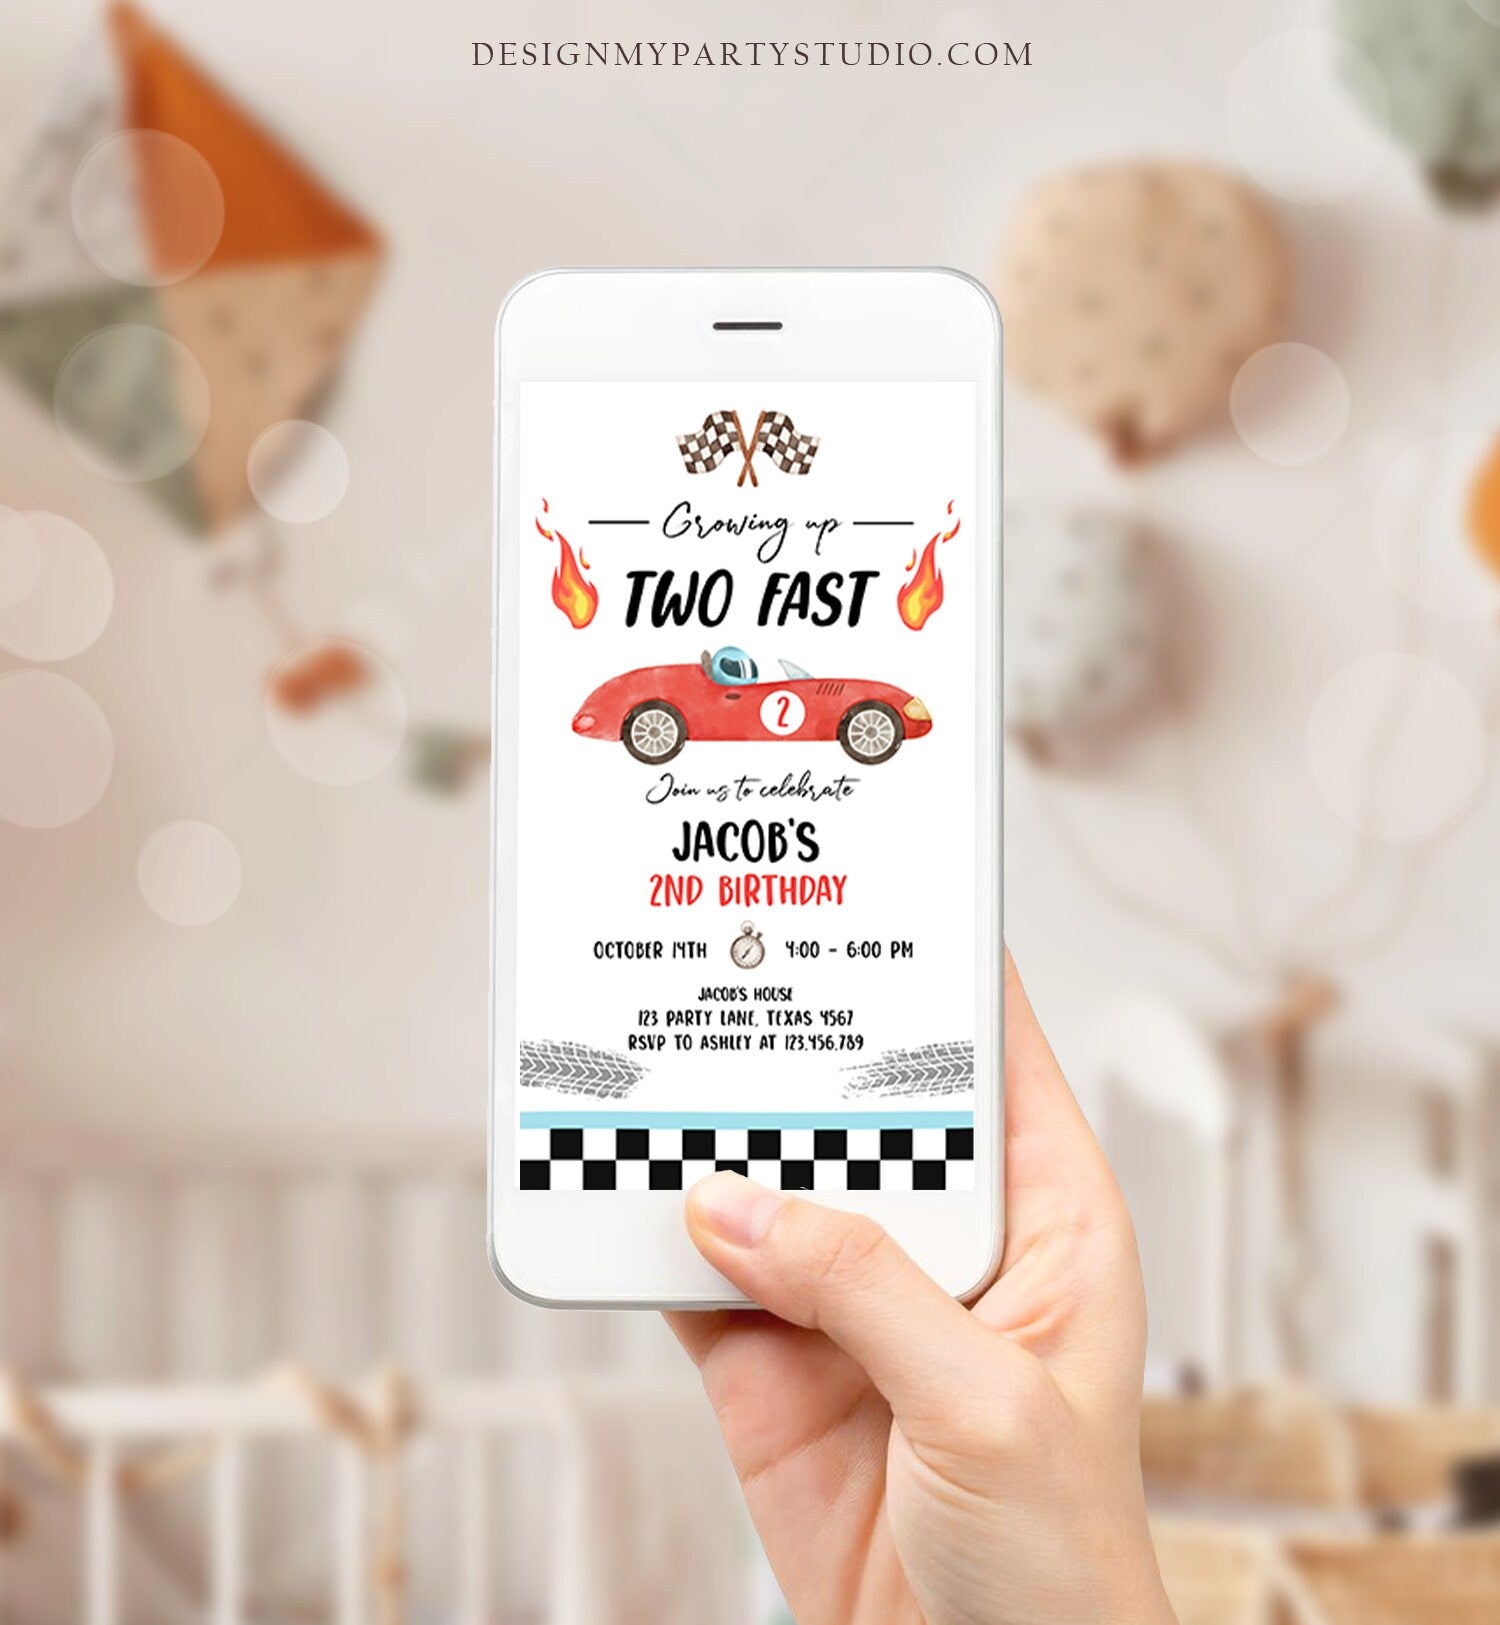 Growing up Two Fast Birthday Invitation Red Race Car Second 